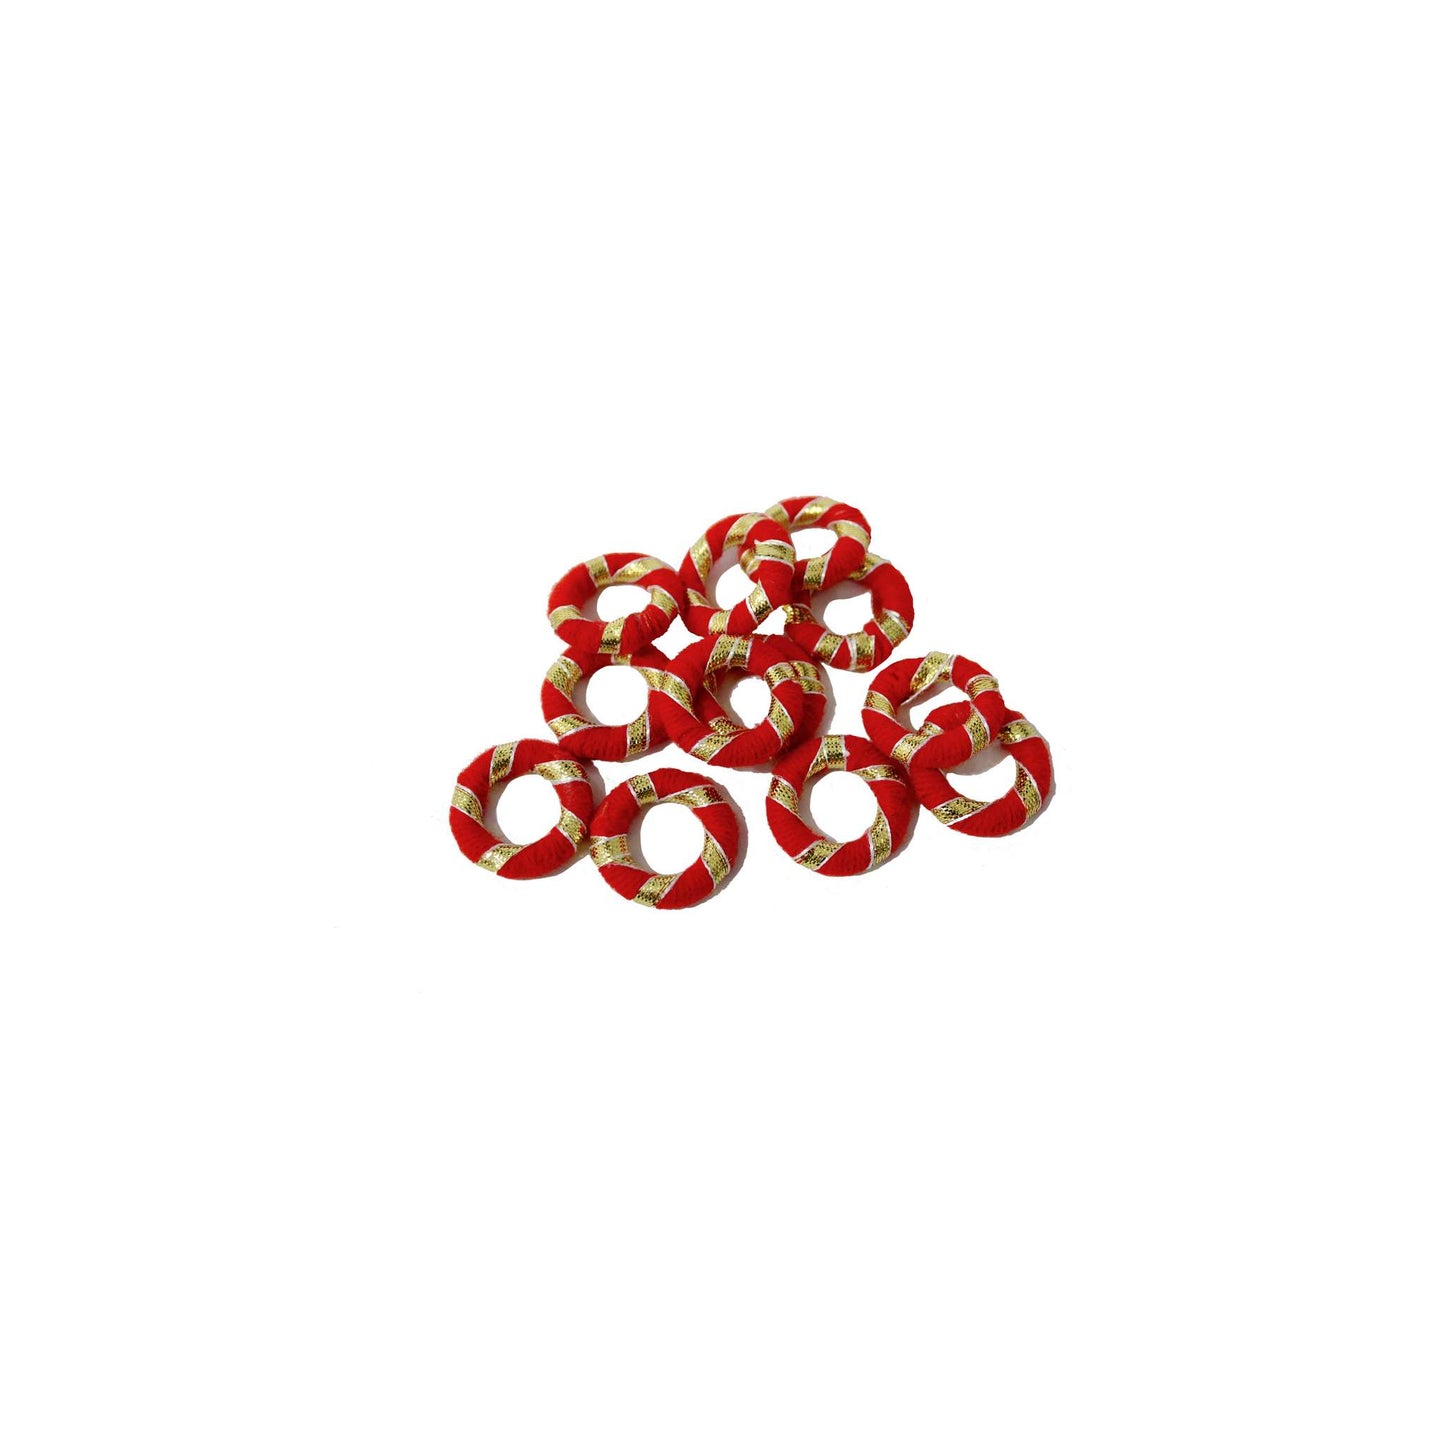 Indian Petals Threaded Round Bangle with Gota Motif for Craft Trousseau Packing Decoration - Design 552, Small, Red